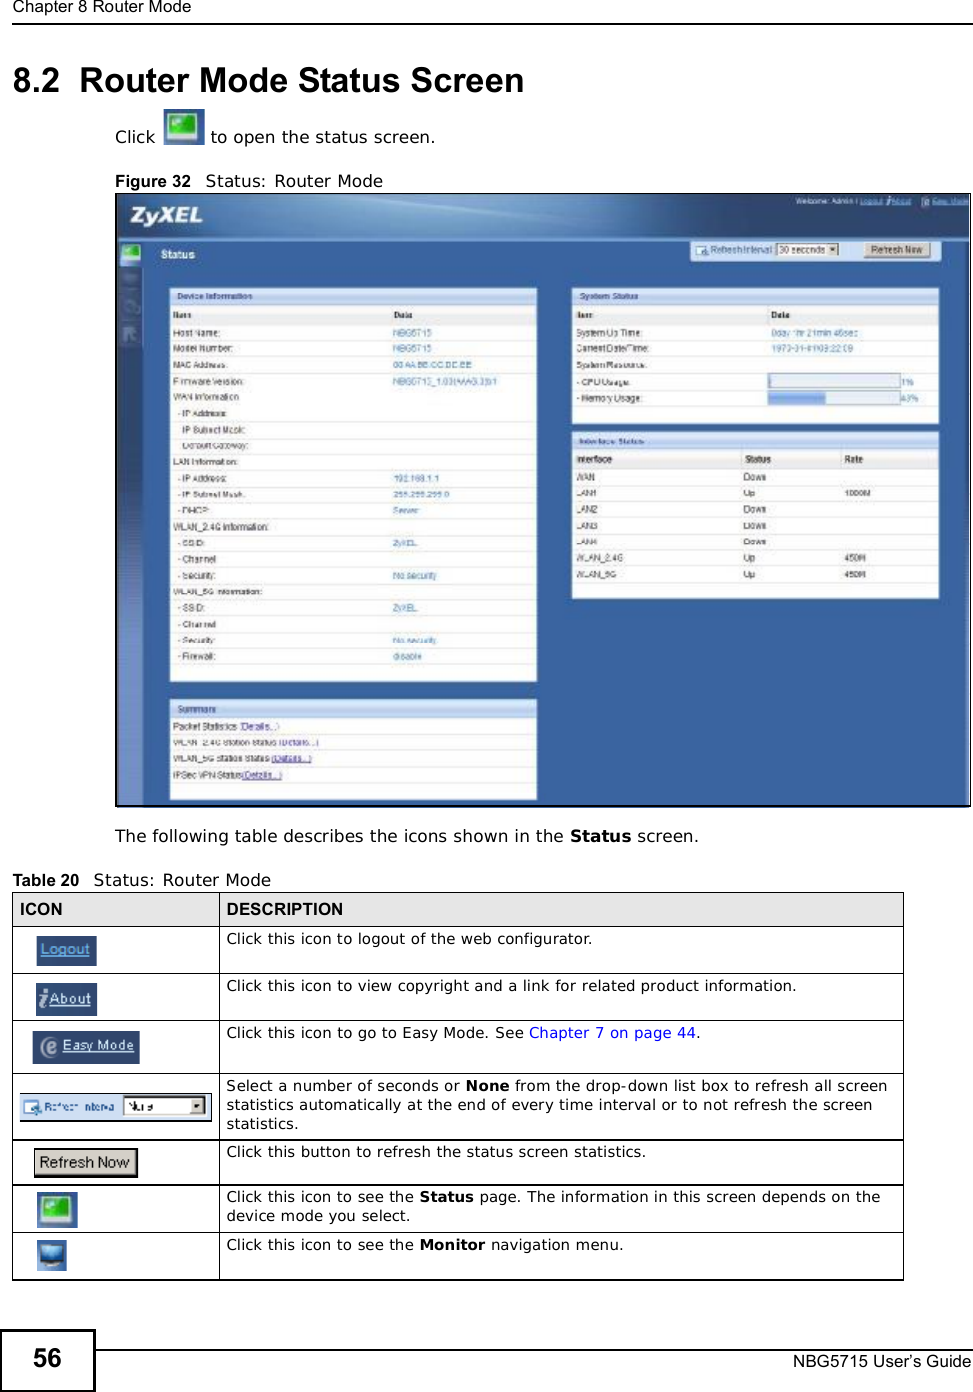 Chapter 8Router ModeNBG5715 User’s Guide568.2  Router Mode Status ScreenClick to open the status screen. Figure 32   Status: Router Mode The following table describes the icons shown in the Status screen.Table 20   Status: Router Mode ICON DESCRIPTIONClick this icon to logout of the web configurator.Click this icon to view copyright and a link for related product information.Click this icon to go to Easy Mode. See Chapter 7 on page 44.Select a number of seconds or None from the drop-down list box to refresh all screen statistics automatically at the end of every time interval or to not refresh the screen statistics.Click this button to refresh the status screen statistics.Click this icon to see the Status page. The information in this screen depends on the device mode you select. Click this icon to see the Monitor navigation menu. 